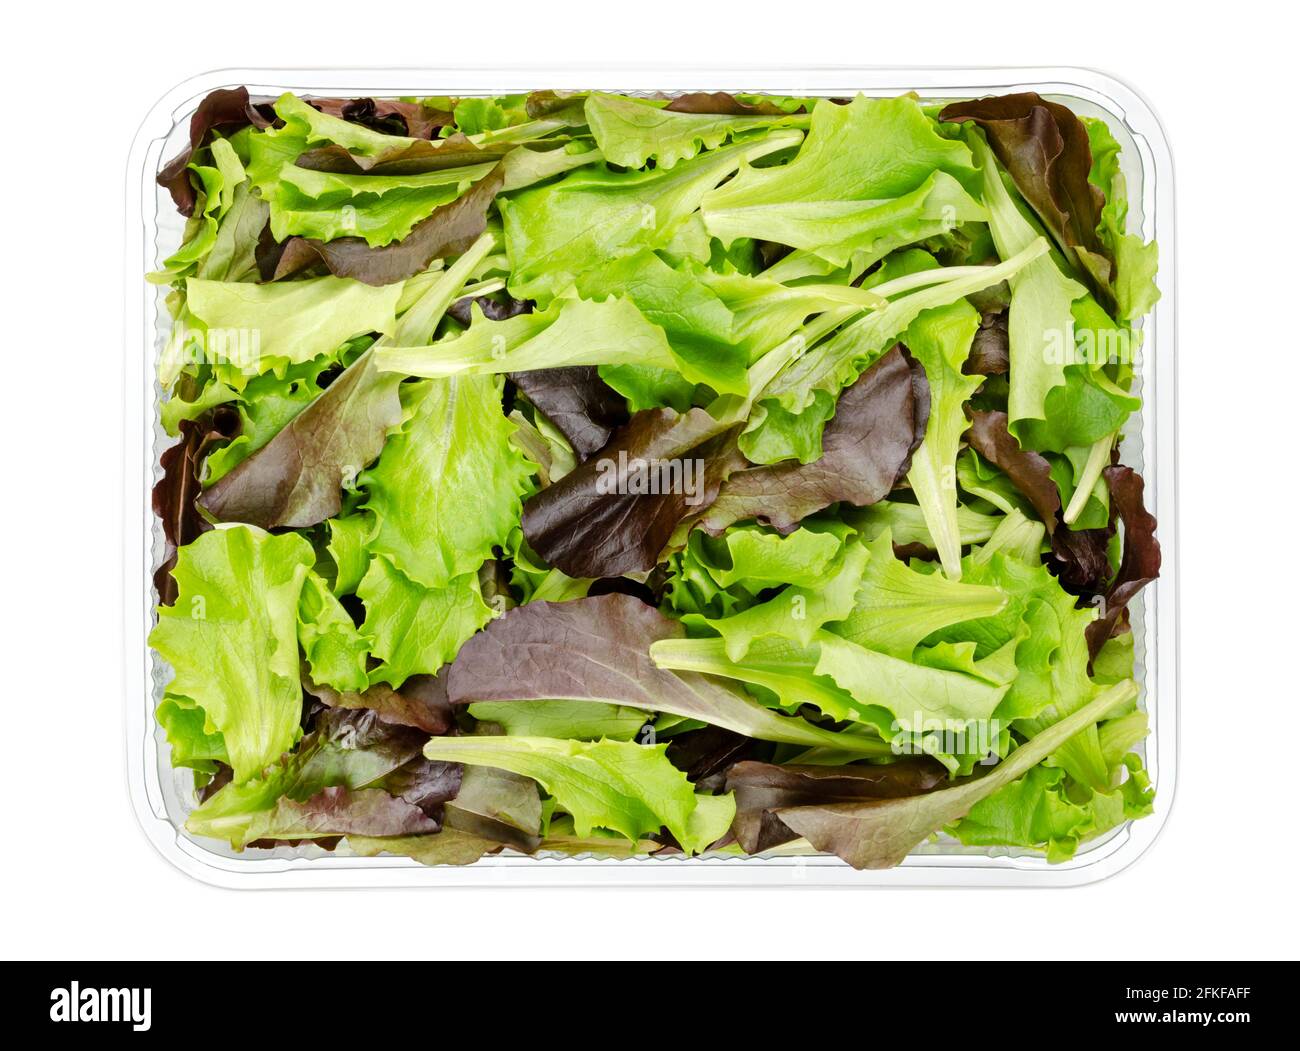 Fresh picked loose leaf lettuce, red and green leaved pluck lettuce, in a plastic container, from above. Pick or looseleaf lettuce, used for salads. Stock Photo